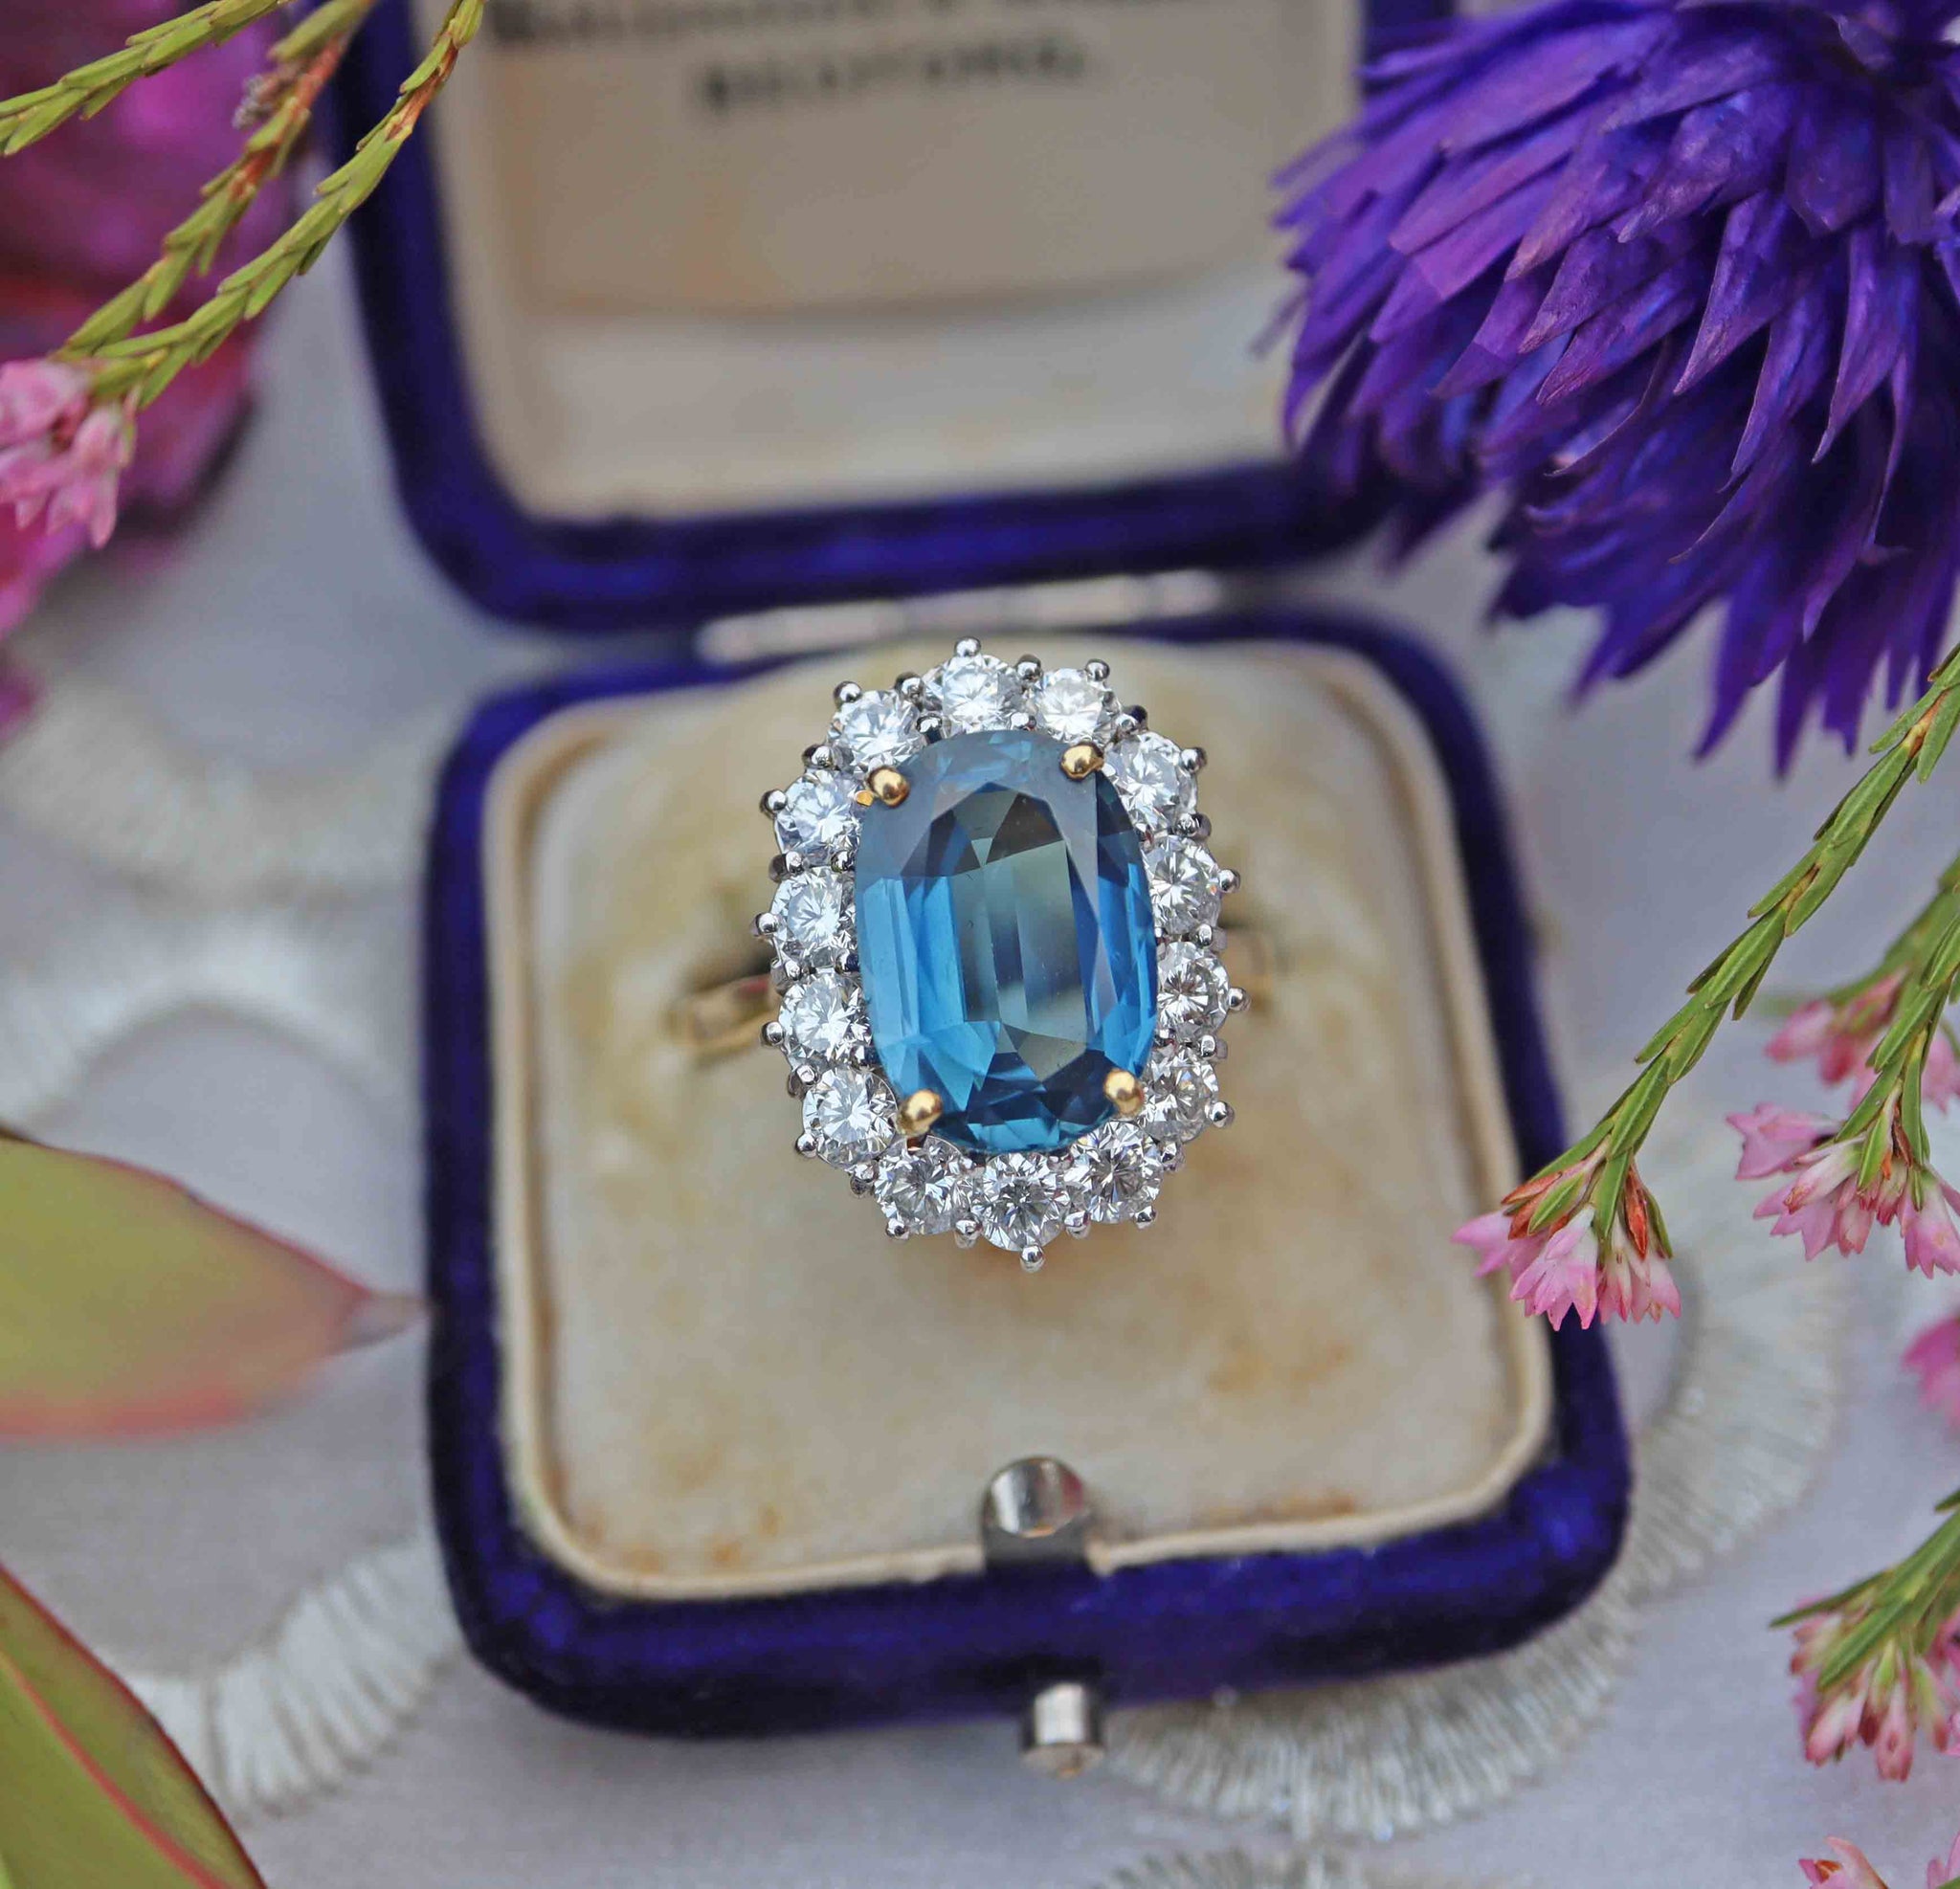 Princess Diana antique style sapphire engagement ring in a blue velvet antique ring box